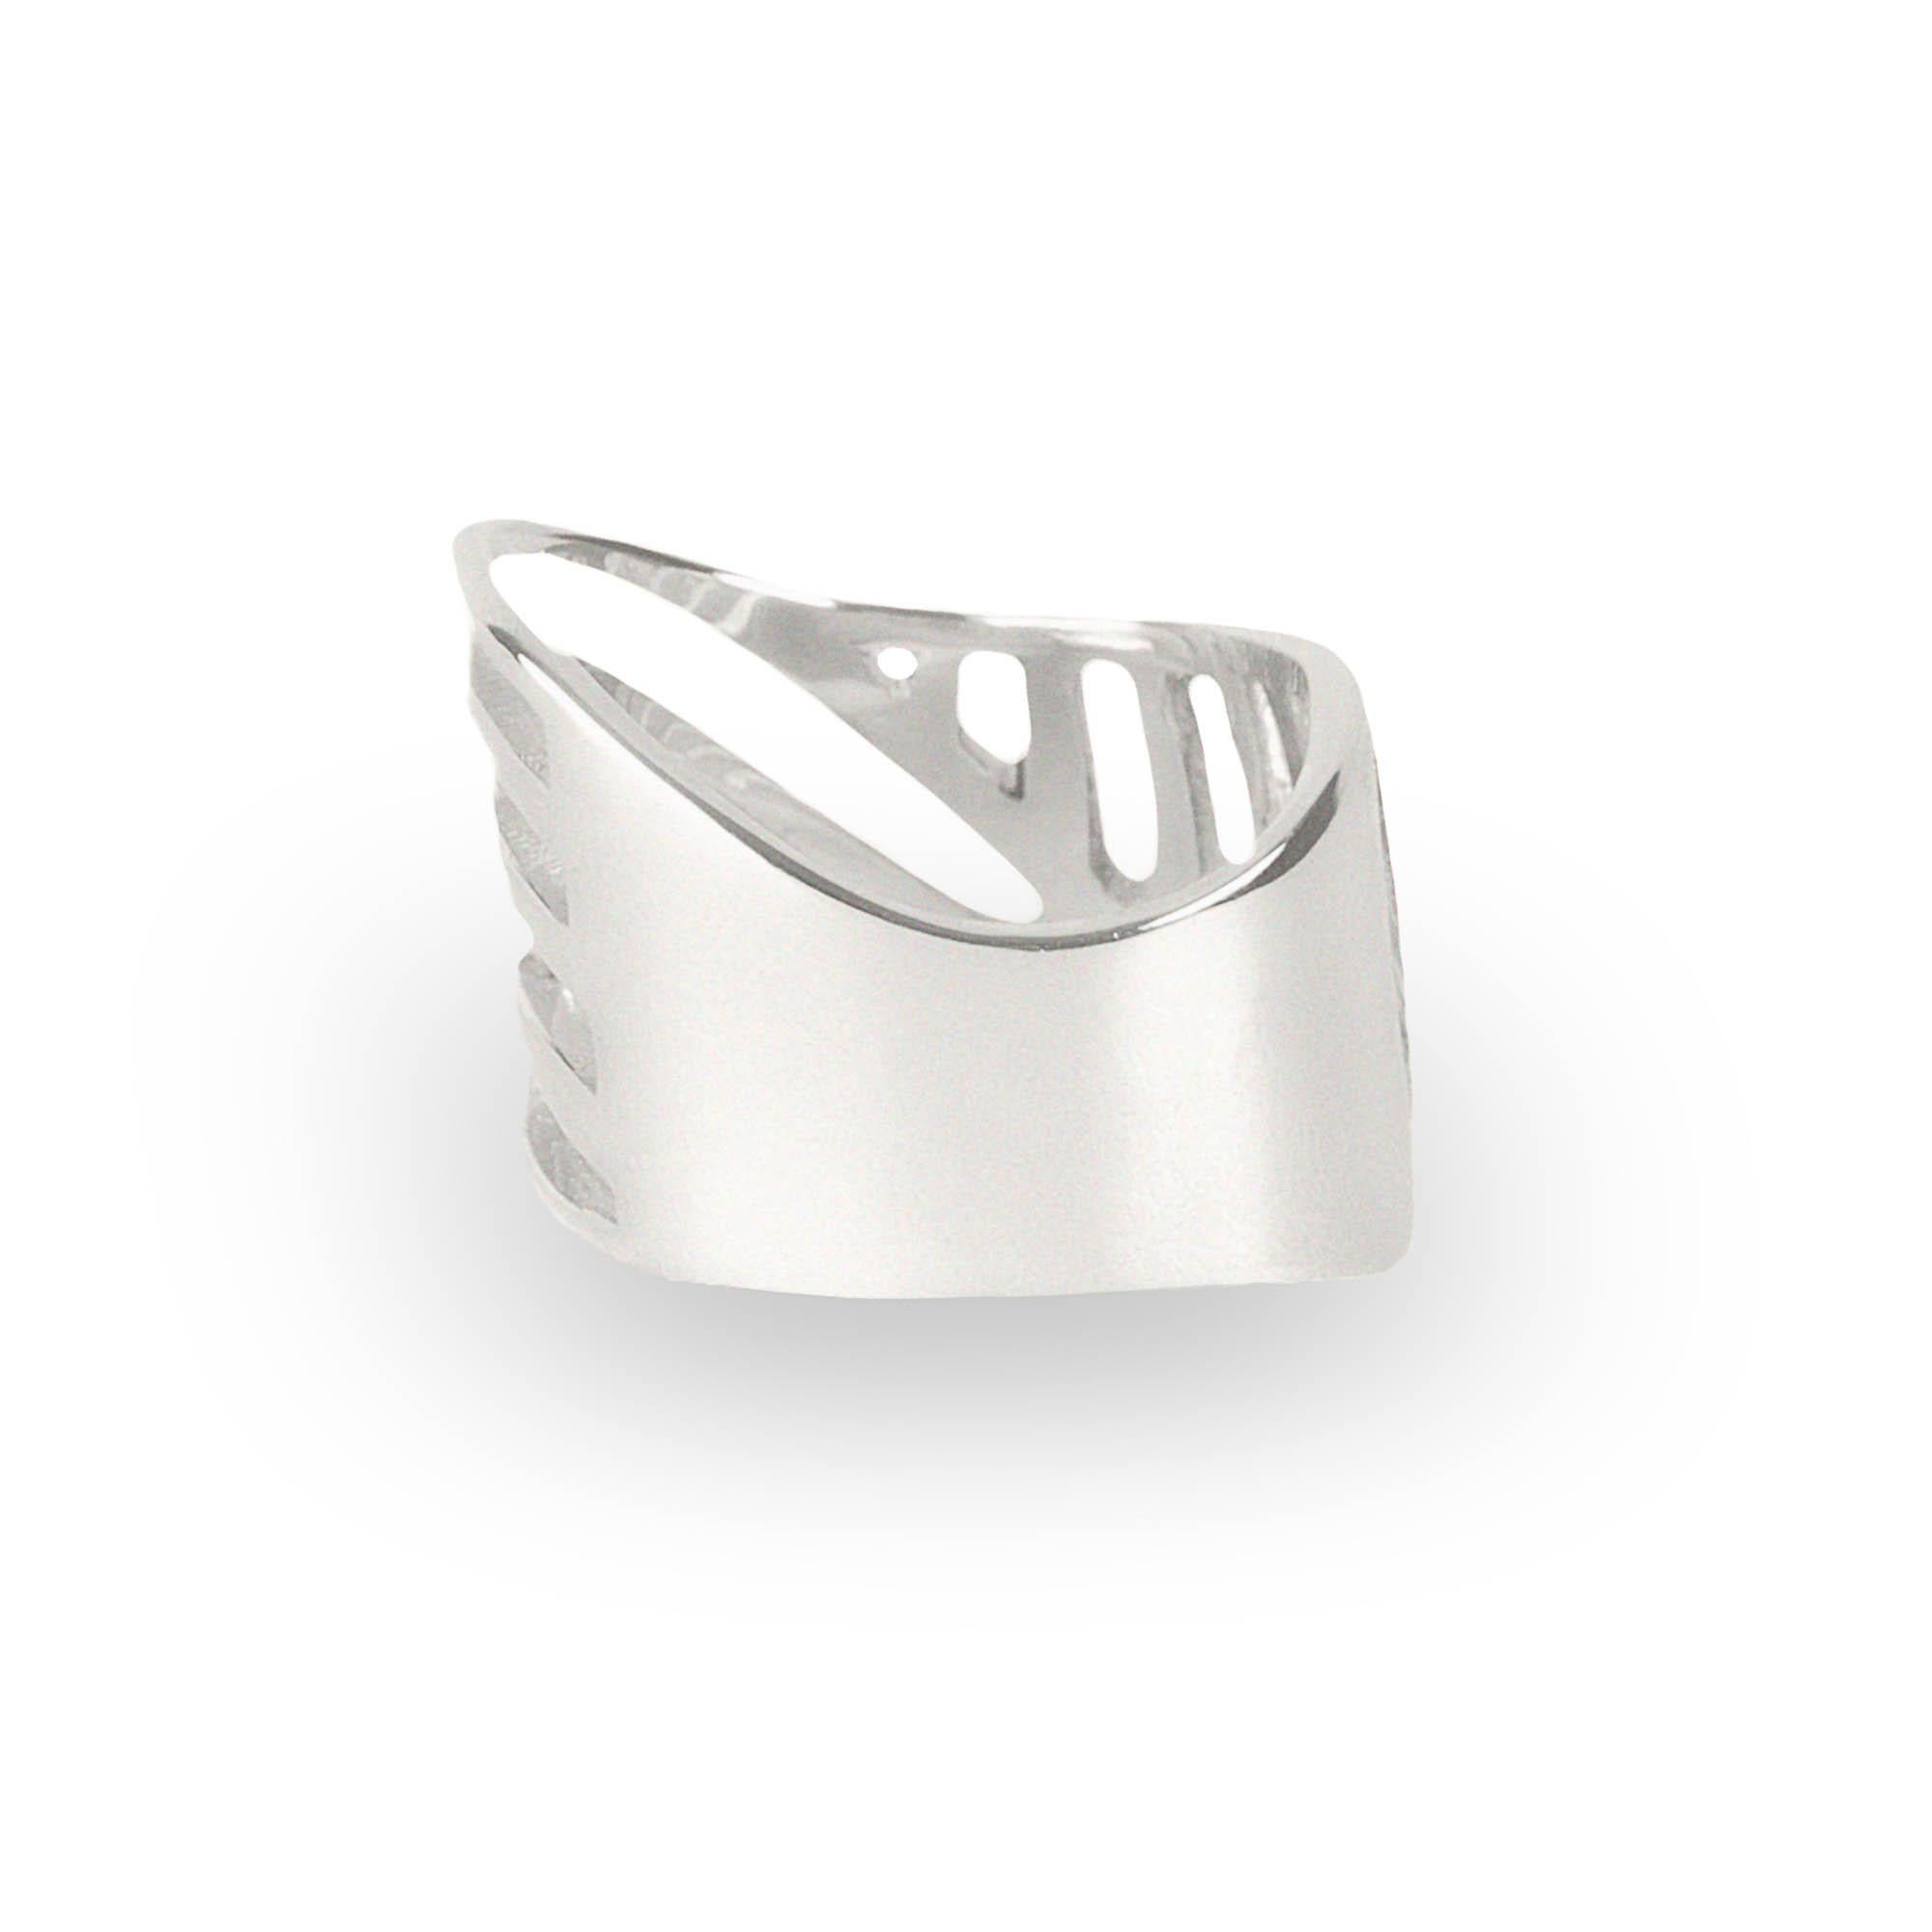 Unisex band ring in polished sterling silver.
Size UK M - US 6 1/4 in stock, more sizes available upon request, made to order items are not returnable
The design is inspired by a fusion of a modernist futurist architecture from the 1970s and the